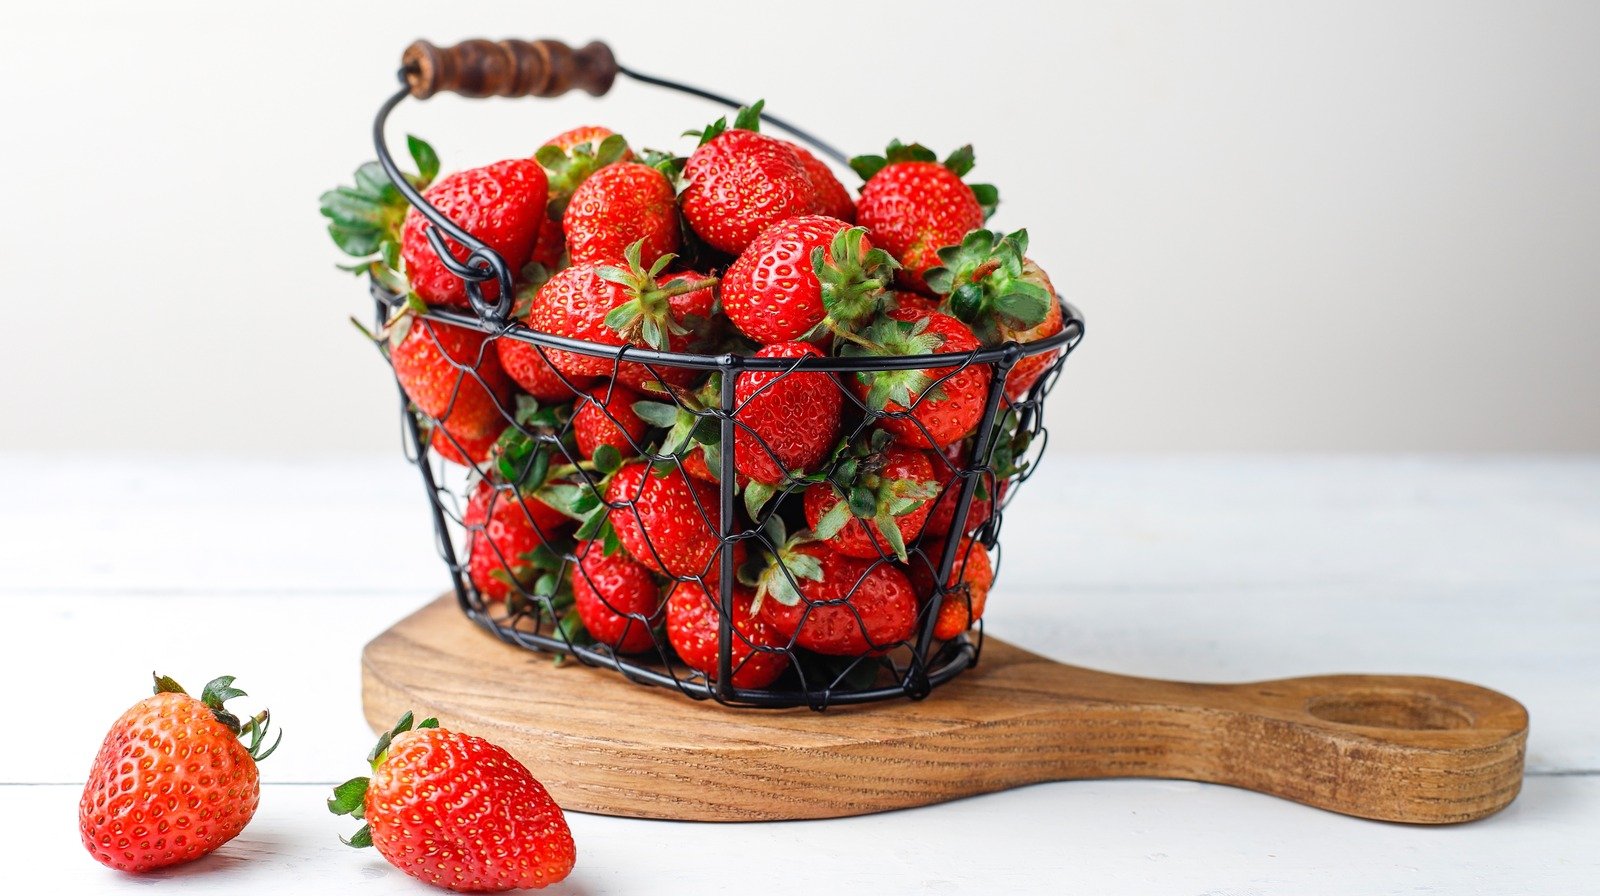 12 Reasons Why You Should Eat More Strawberries